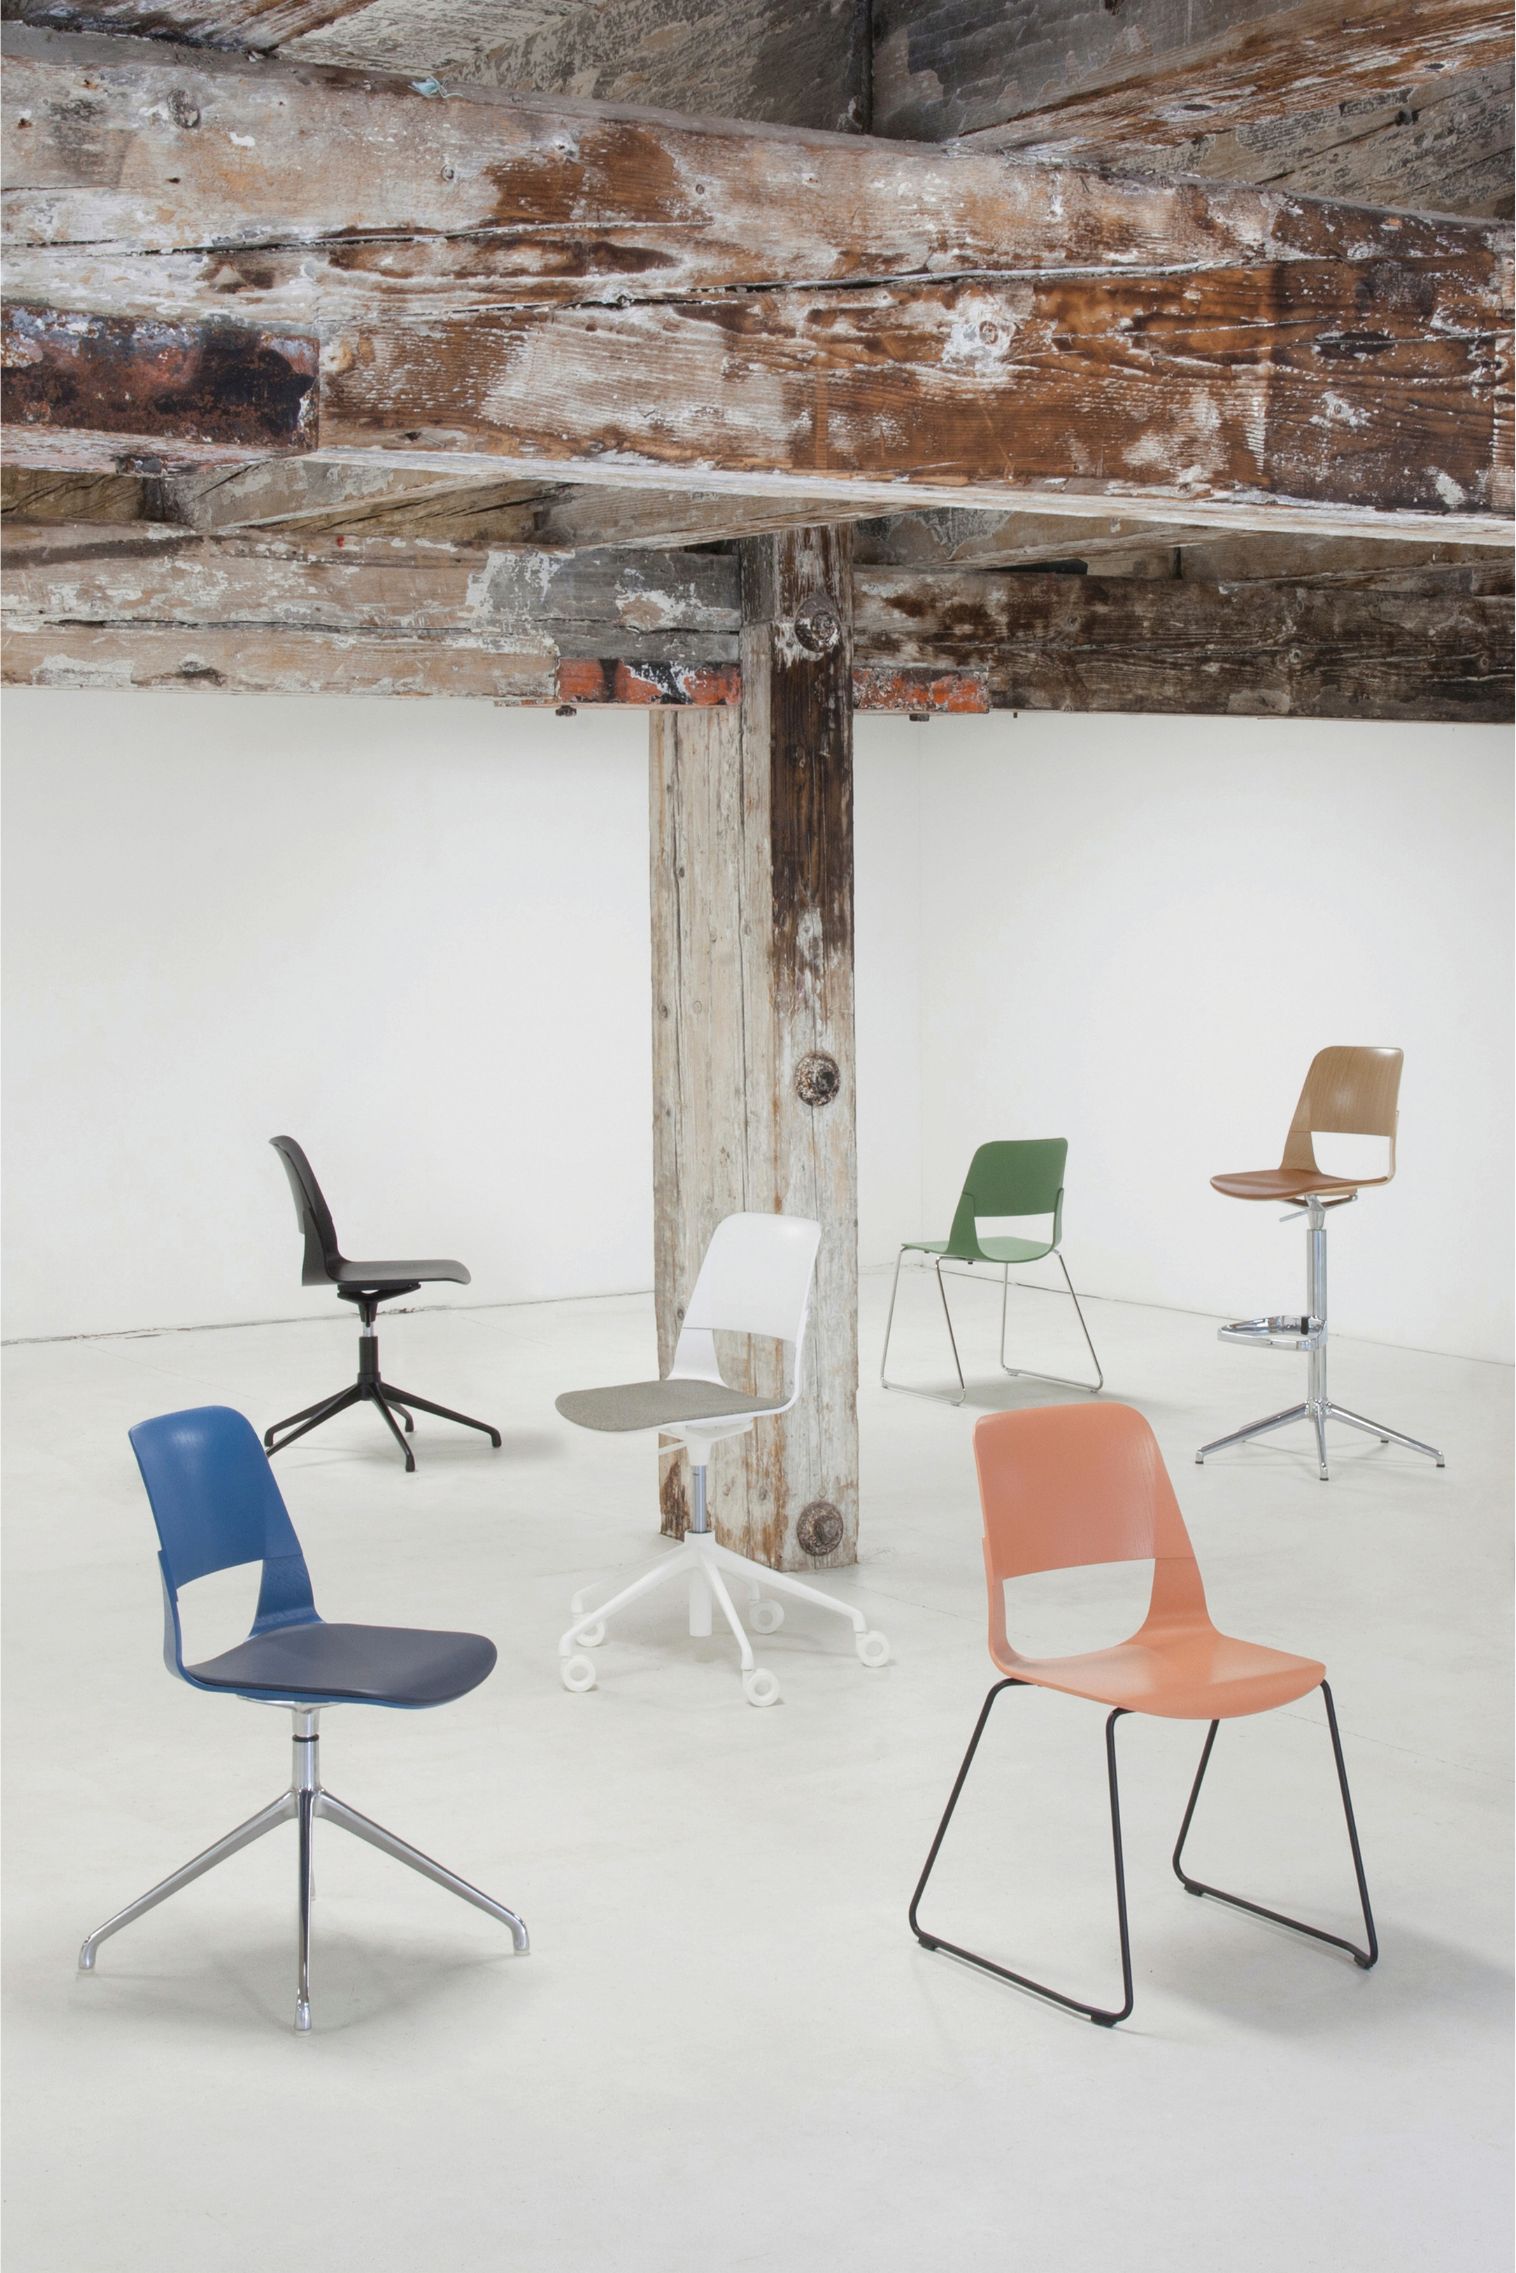 Coloured chairs with different leg structures (sled base, swivel base, wooden leg, heightened leg with footrest).